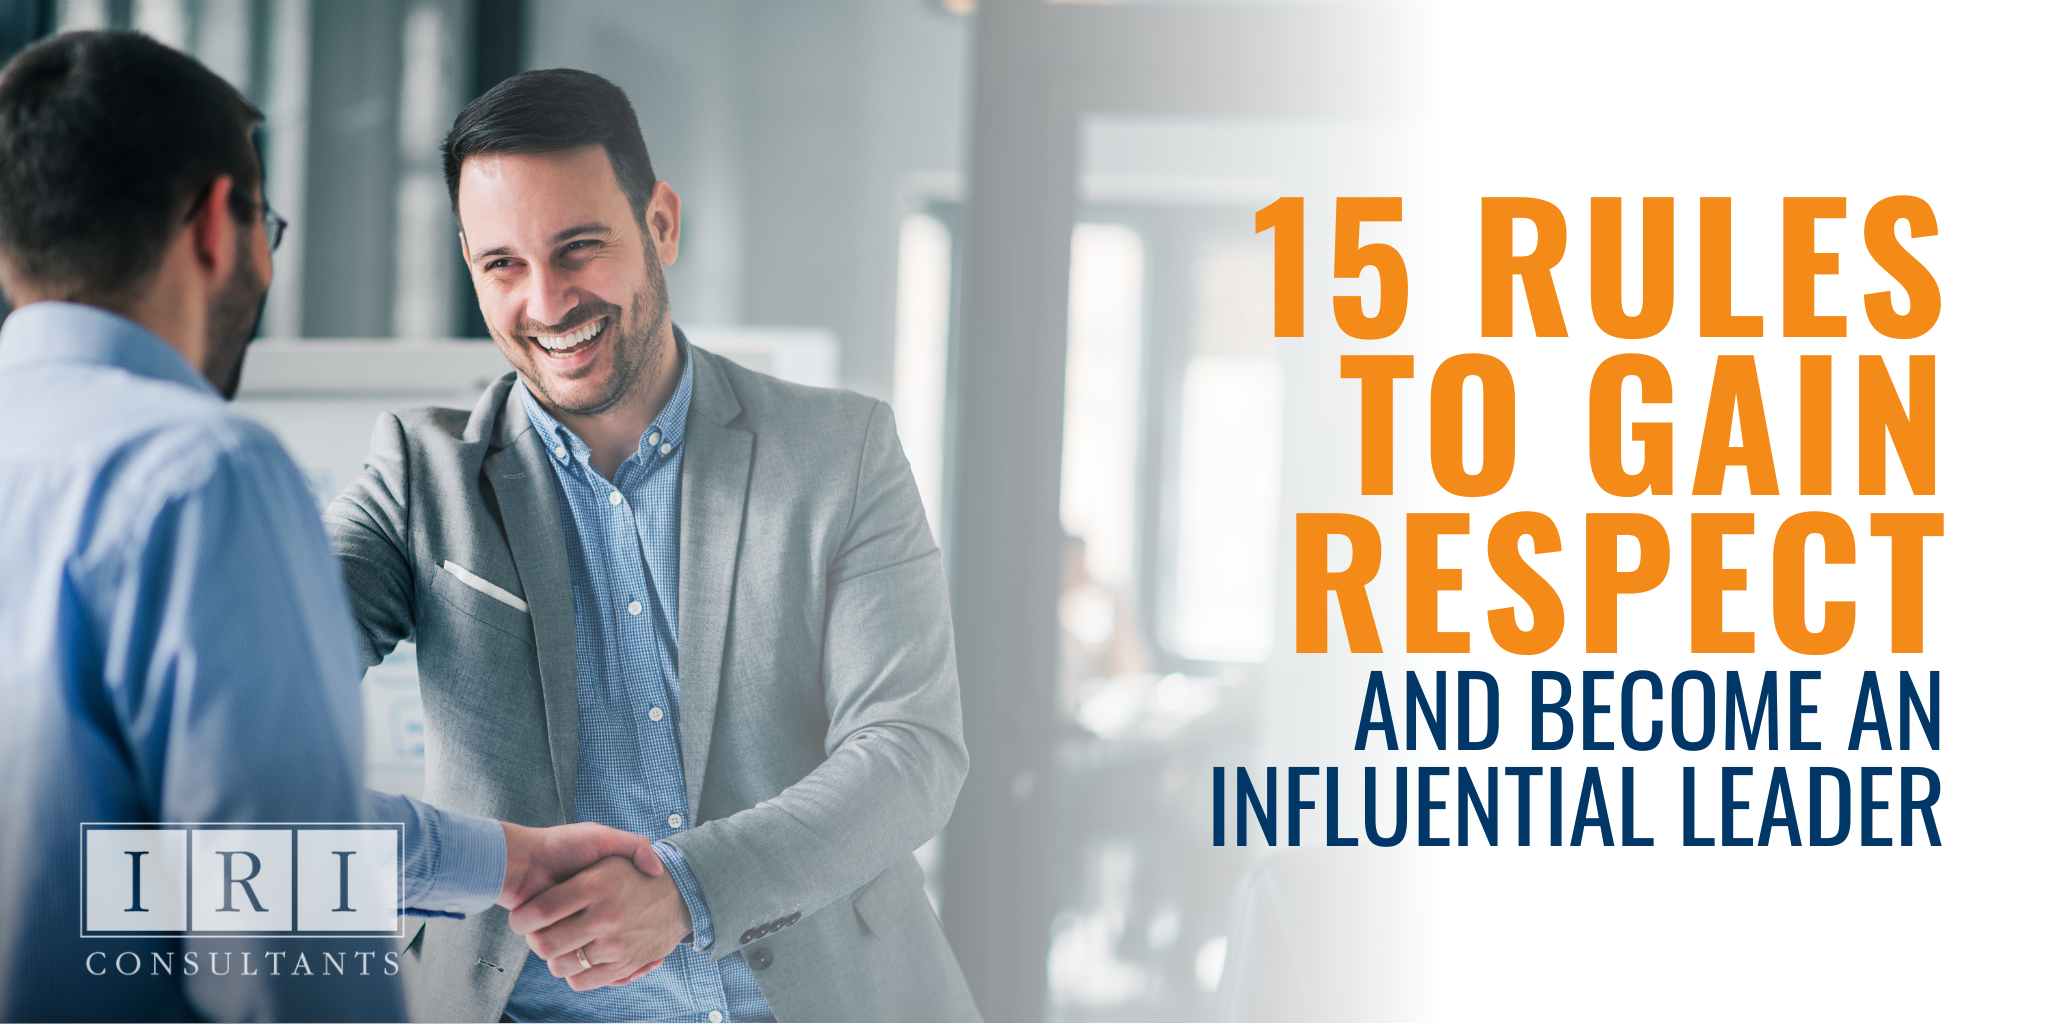 15 rules to gain respect and become an influential leader